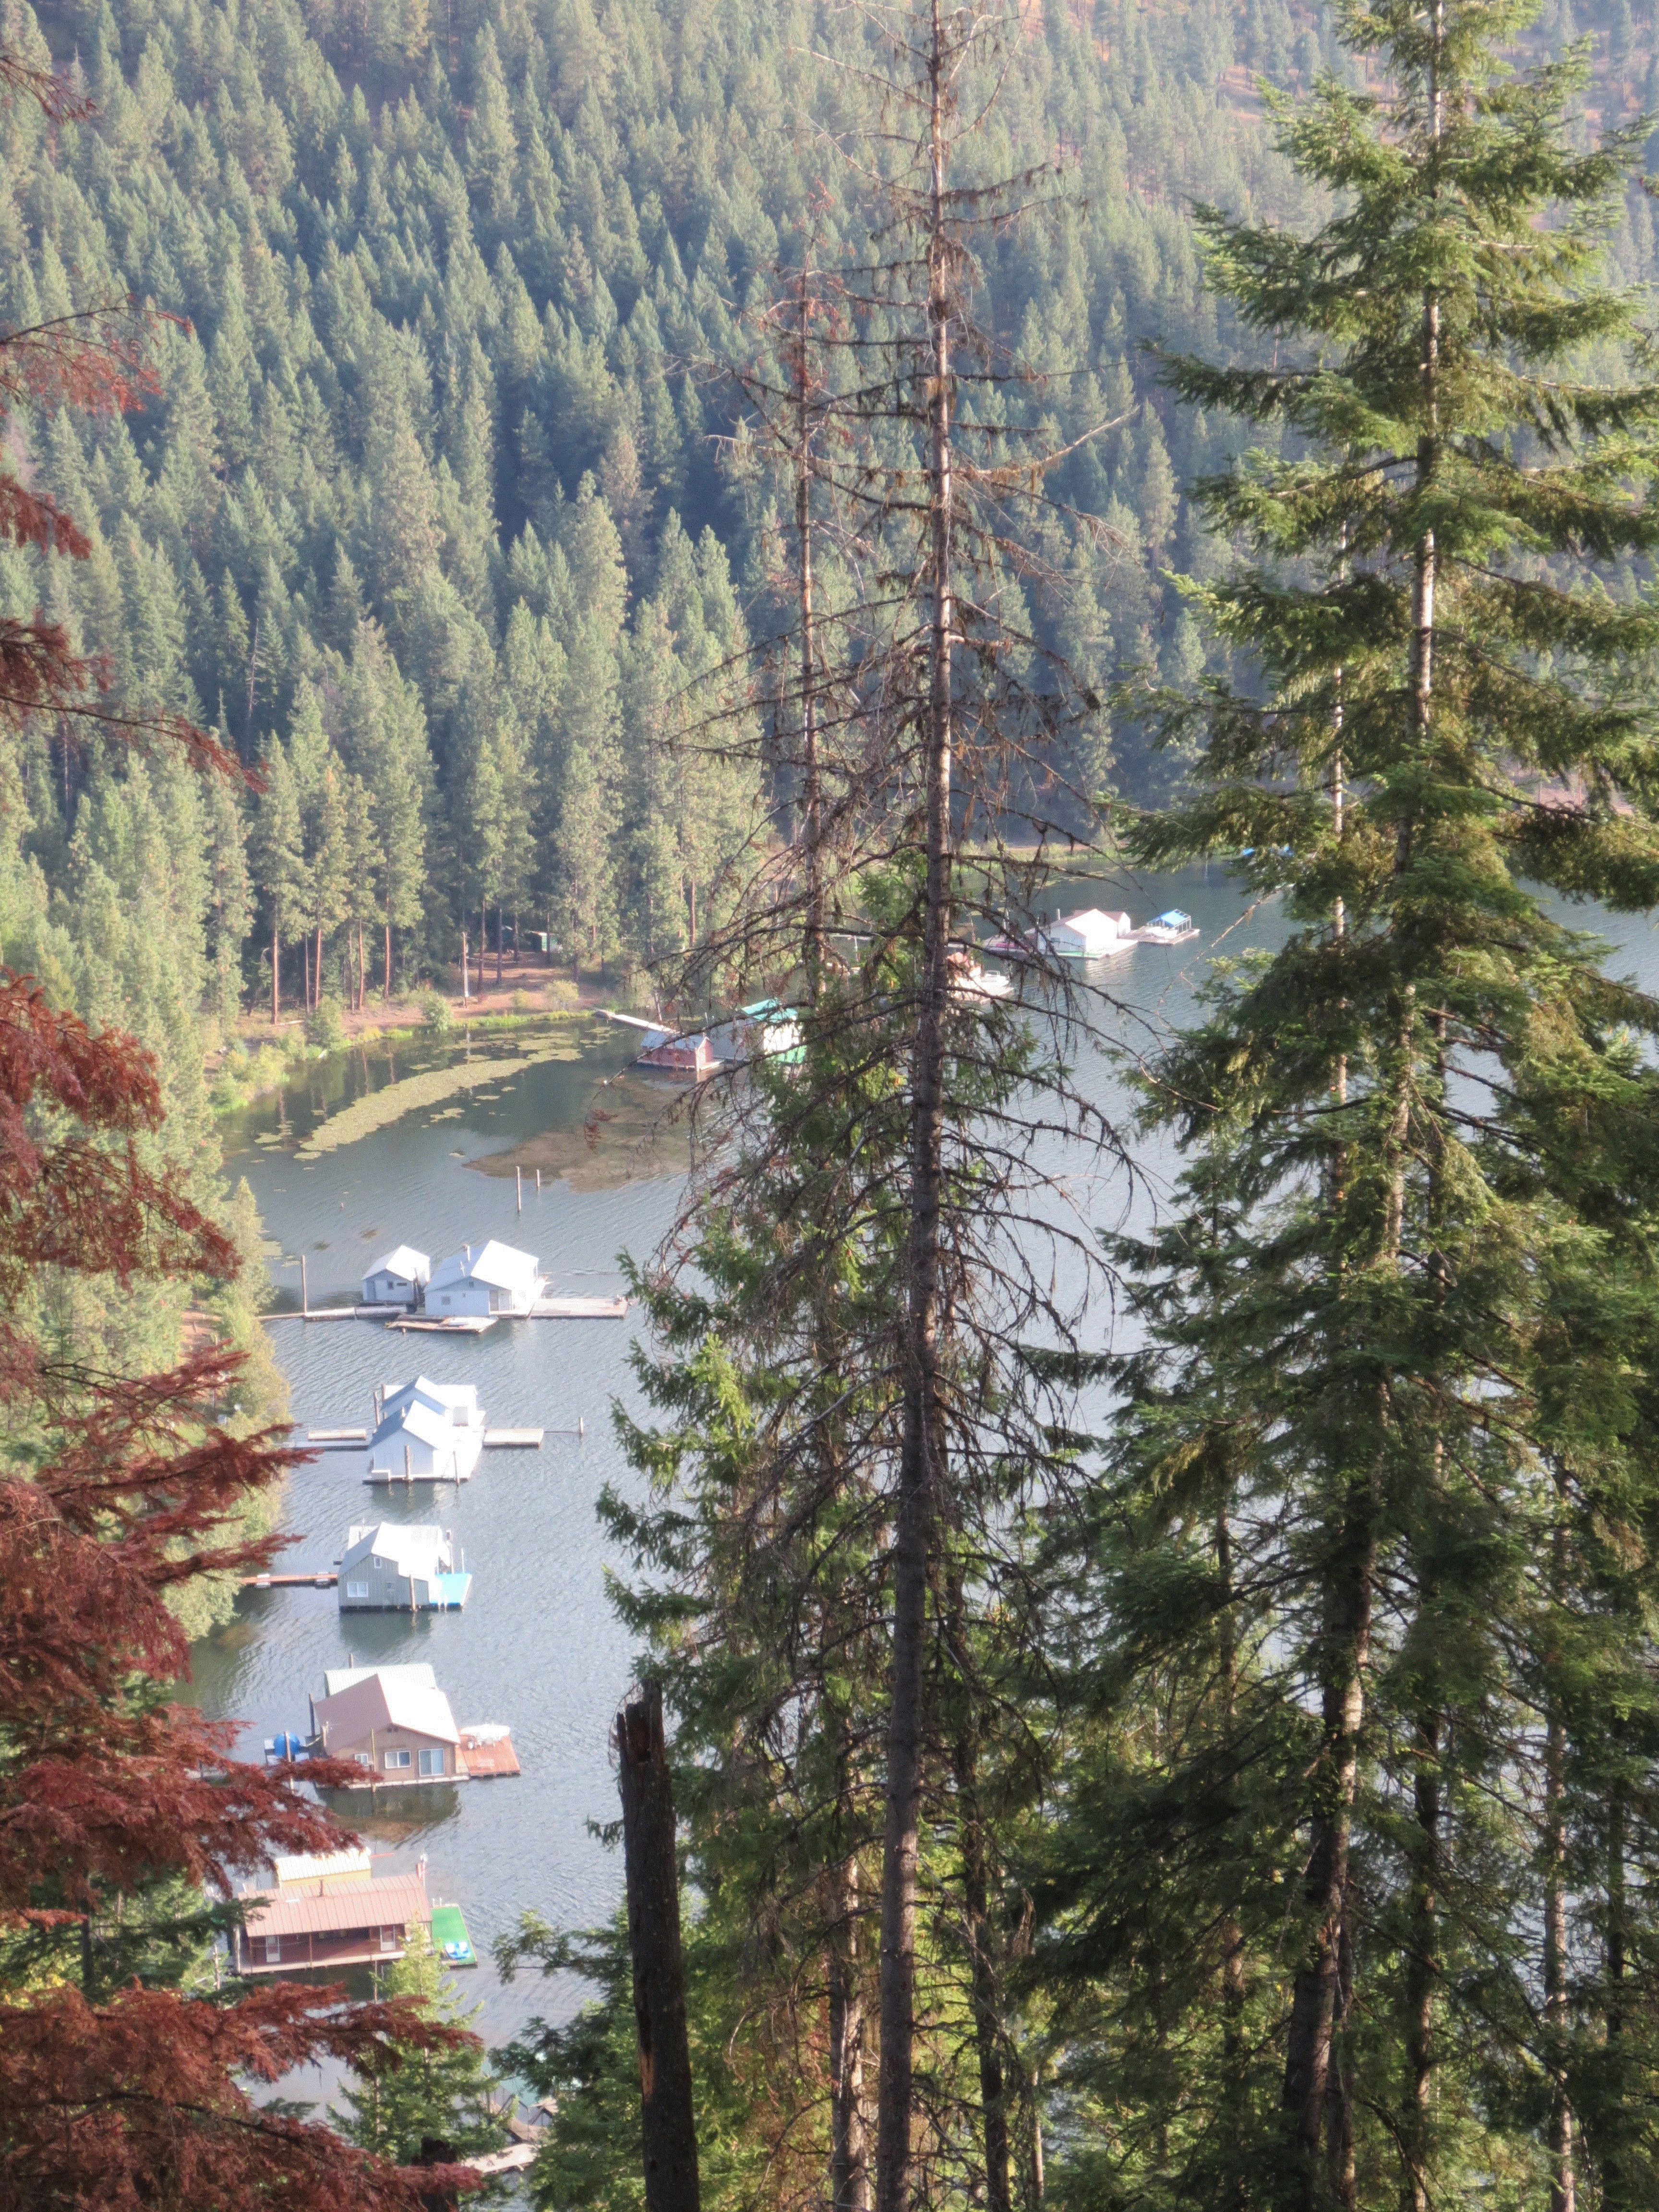 Floating cabins following the curve of the shore, seen through a gap in the trees.